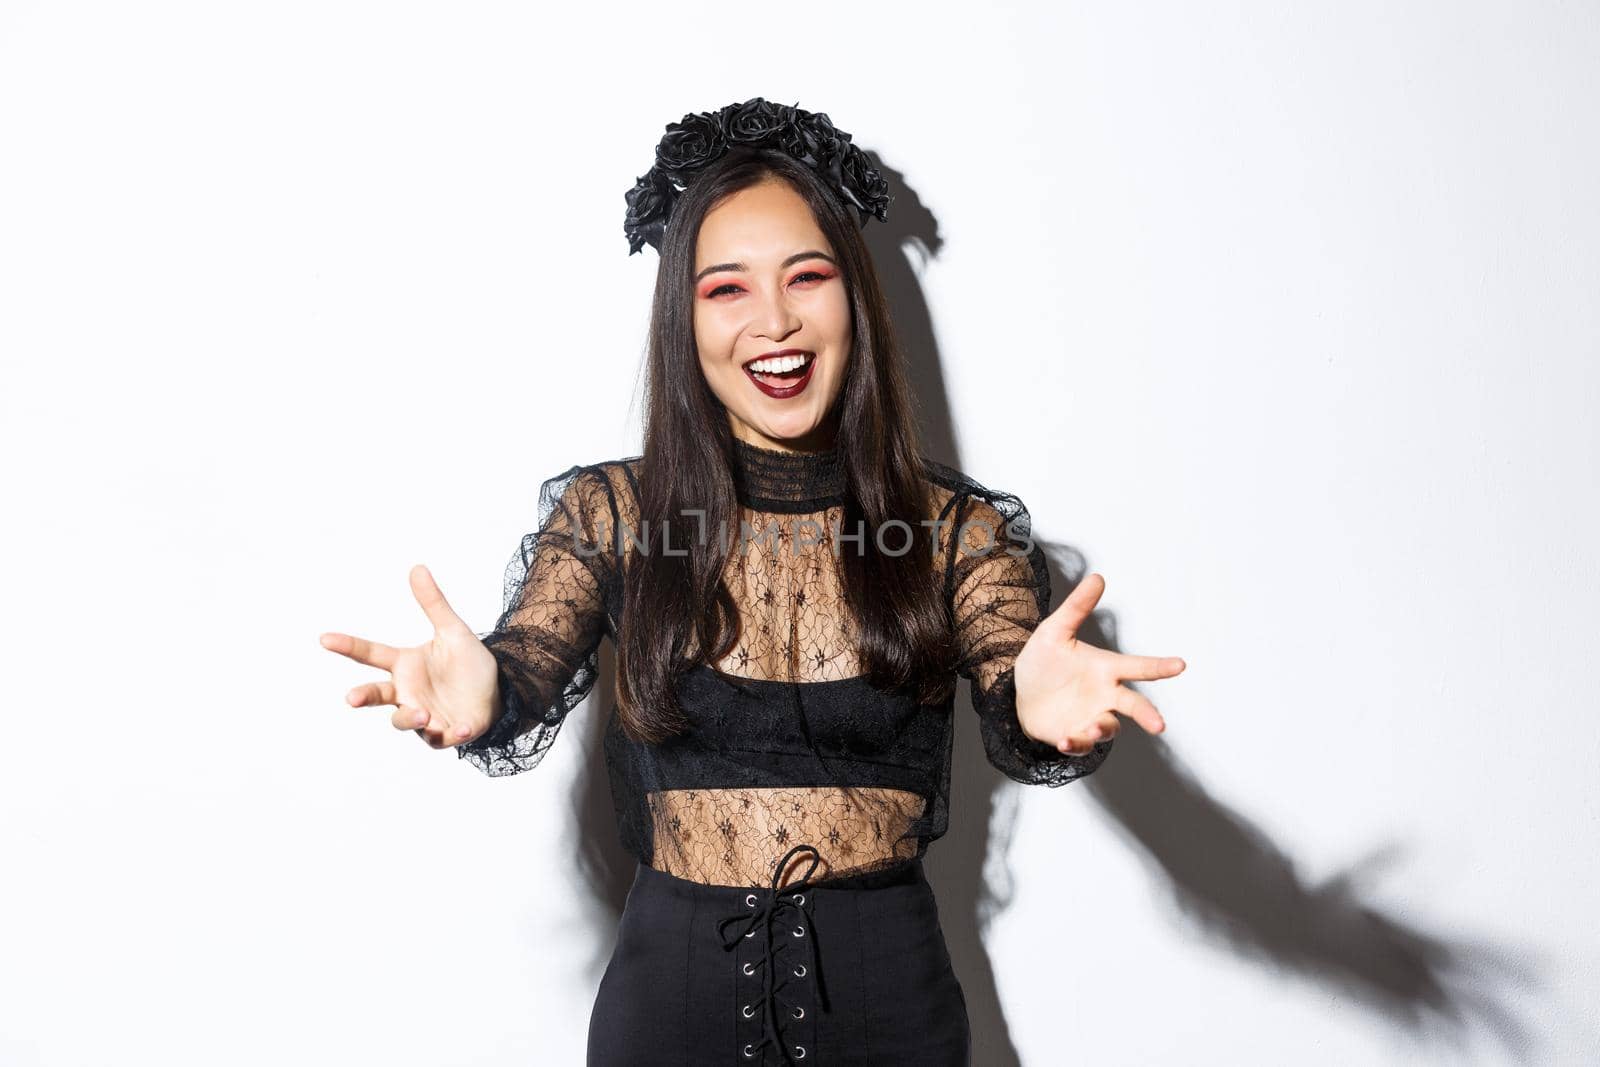 Cheerful smiling beautiful woman in black lace dress and gothic makeup inviting someone. Asian girl spread hands sideways and smiling, welcome come closer, standing white background.